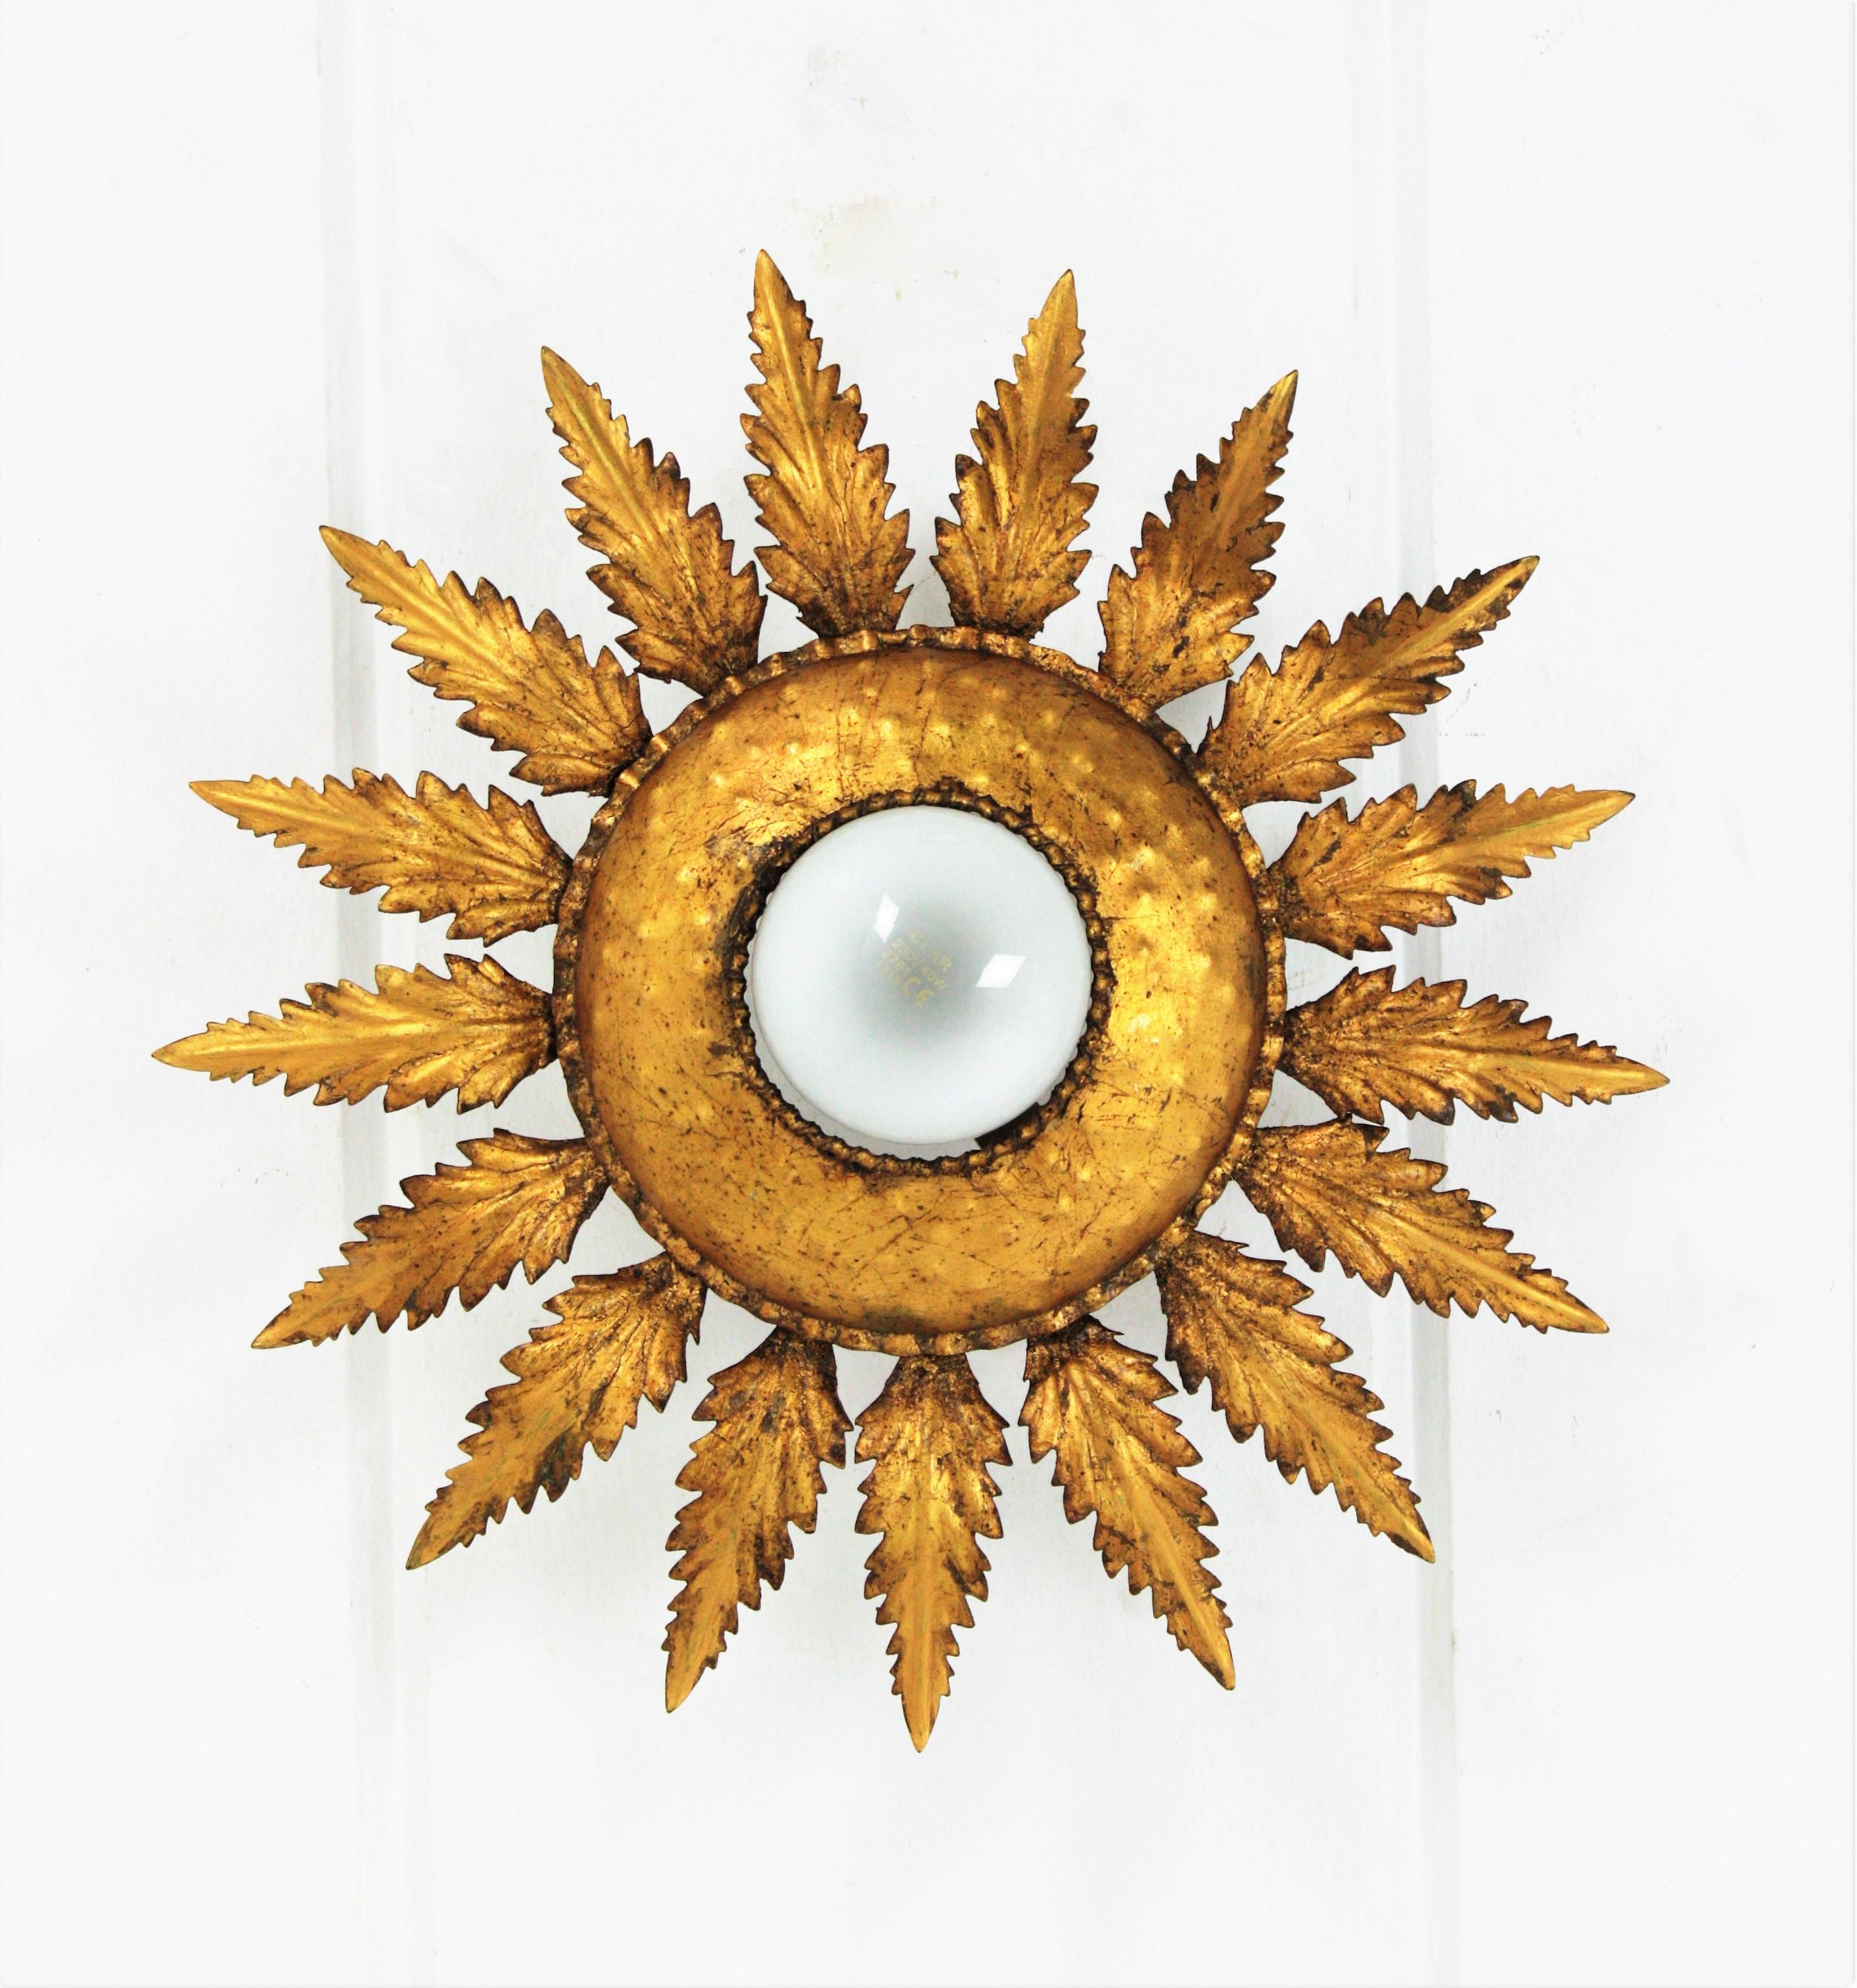 French flower sunburst flush mount, gilt iron, 1950s.
This ceiling light features a frame of leaves surrounding a central exposed bulb. Handcrafted in iron and gilded with gold leag. It has a nice patina.
This sunburst light fixture can be placed